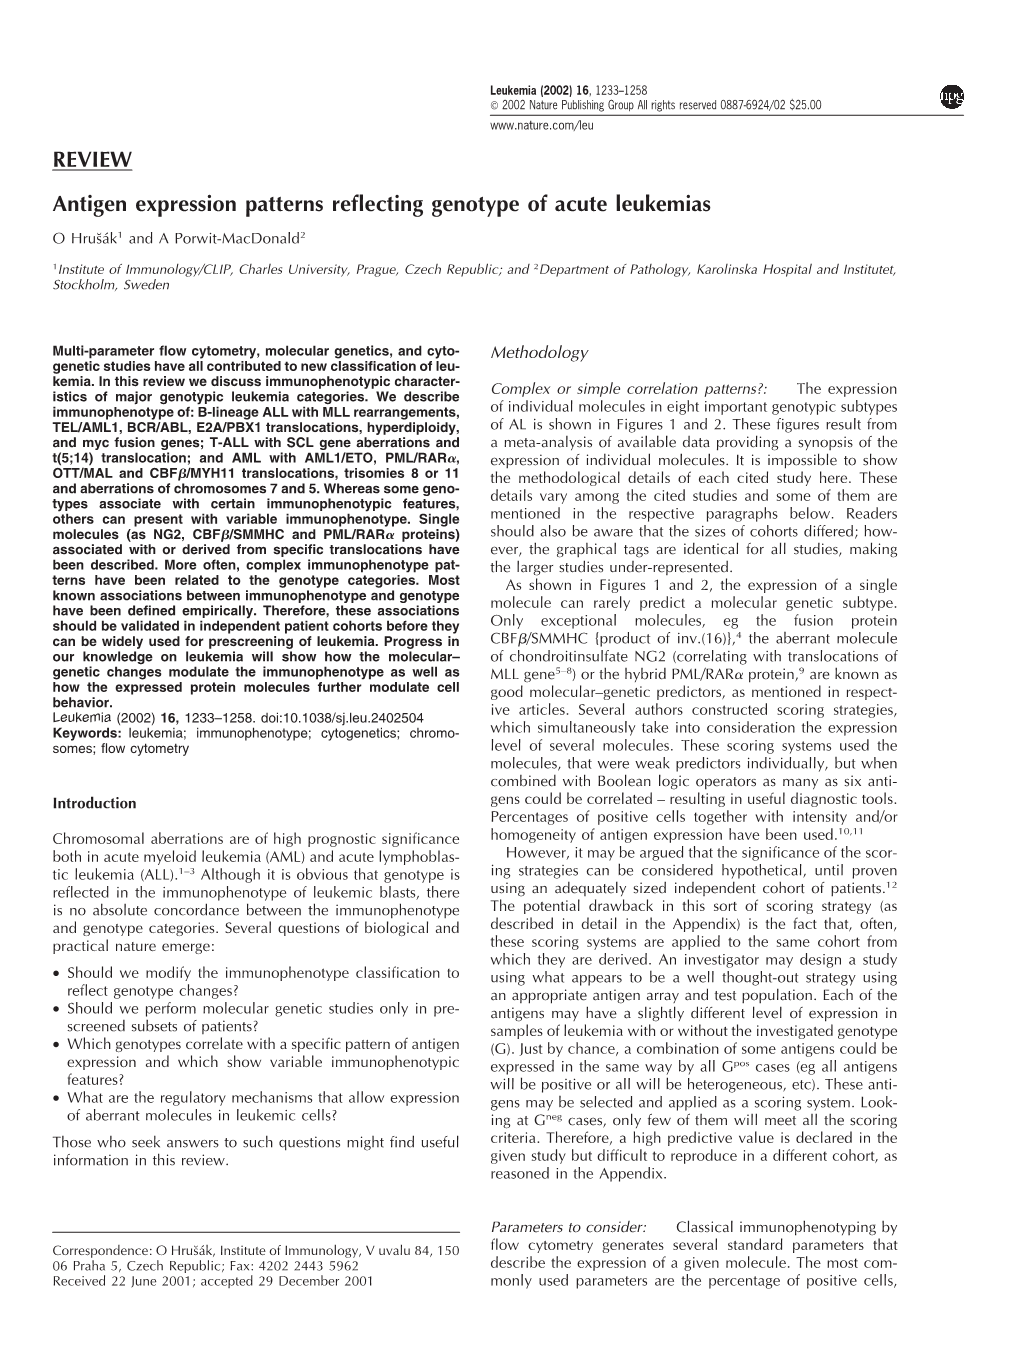 REVIEW Antigen Expression Patterns Reflecting Genotype of Acute